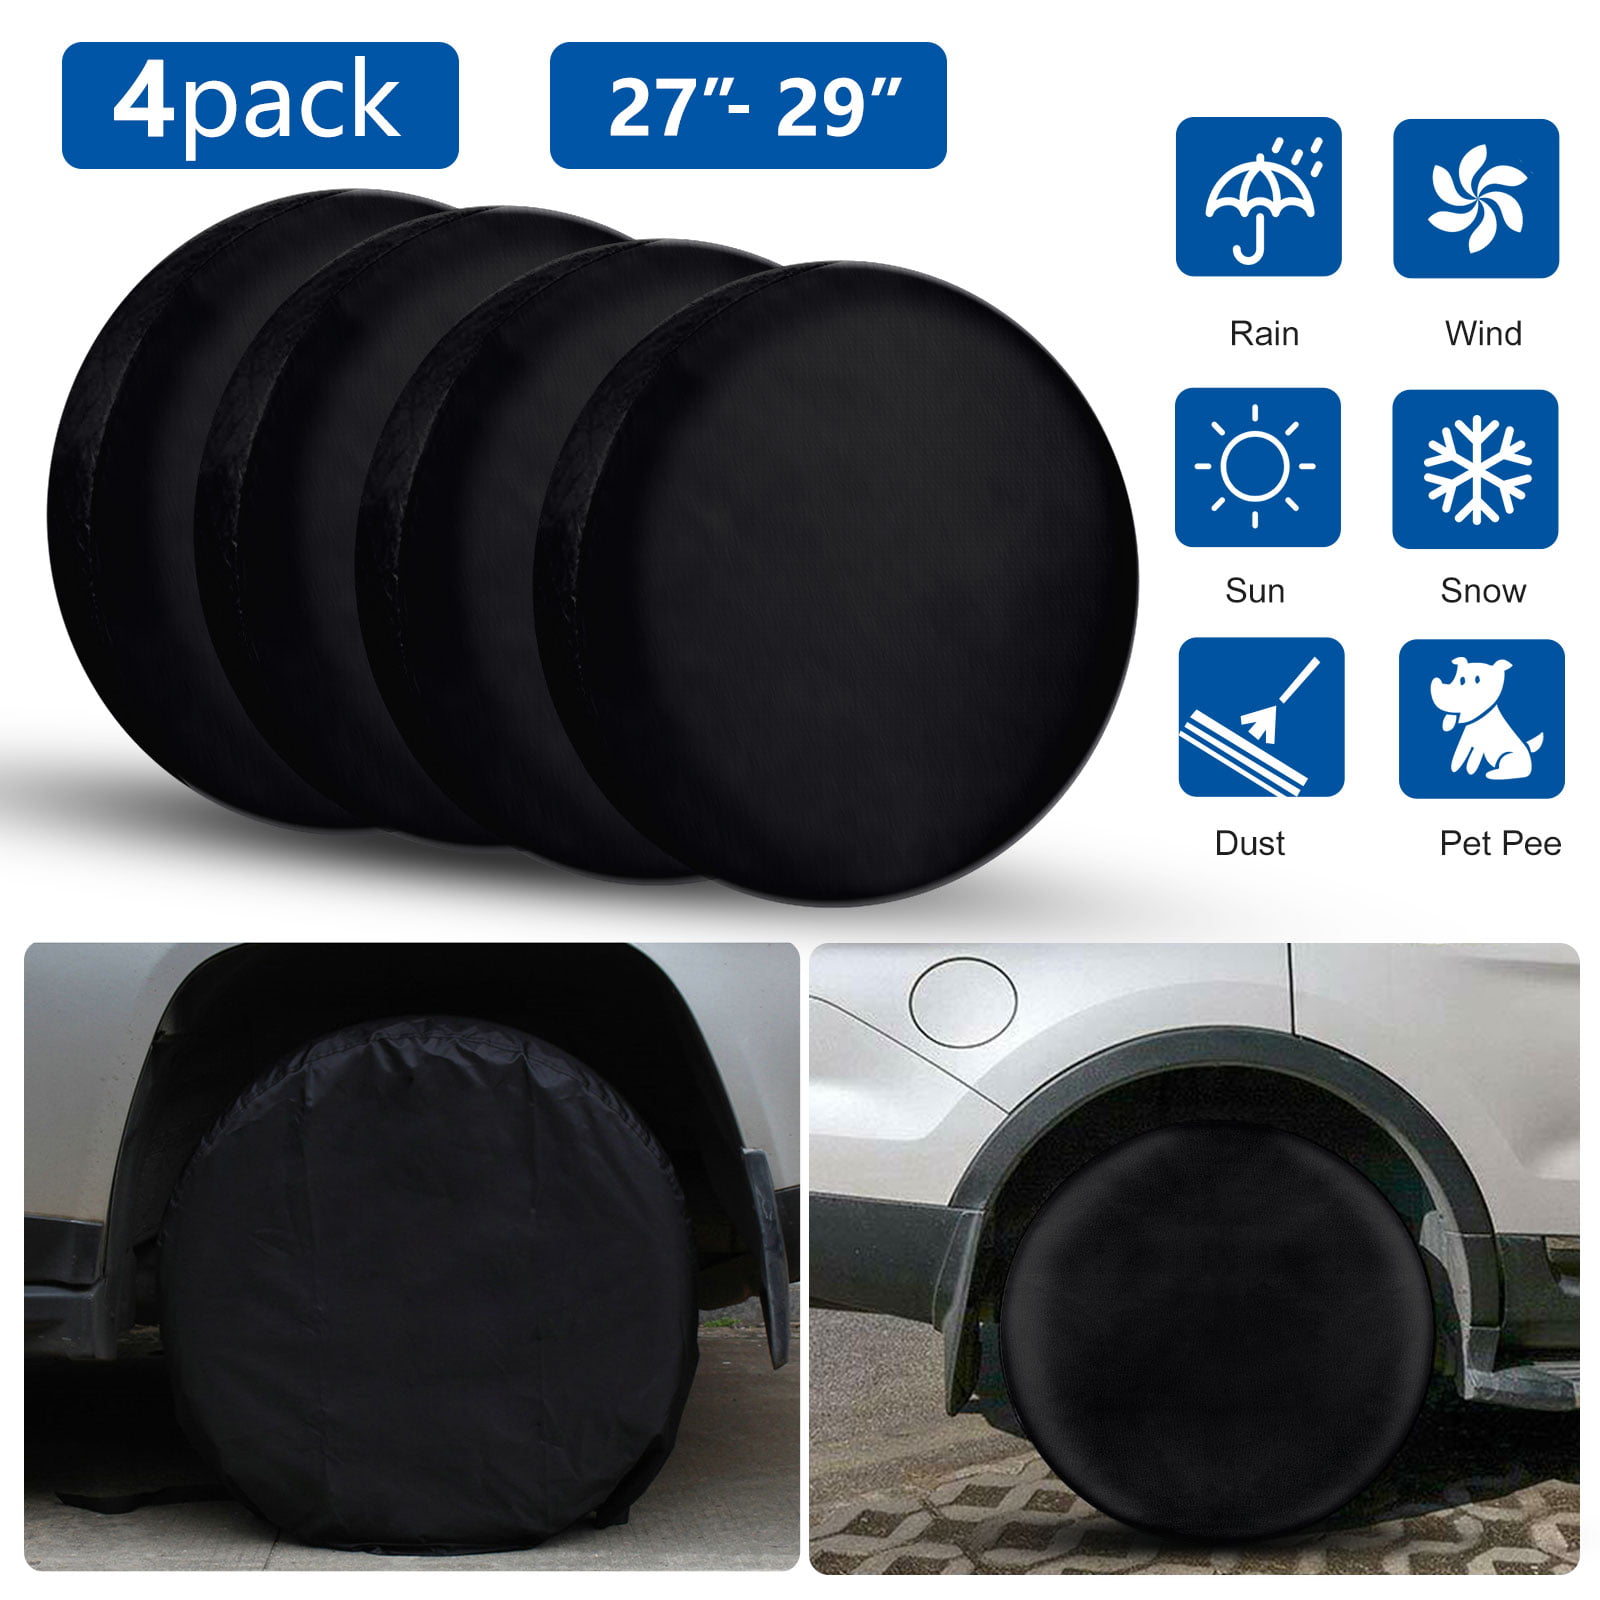 Heavy-Duty Waterproof Wheel Cover Vinyl Cover with All-Weather Protection Grey, 27 Inch-29 InchD*9 Spare Tire Cover - 1 Piece, 1 PVC Bag